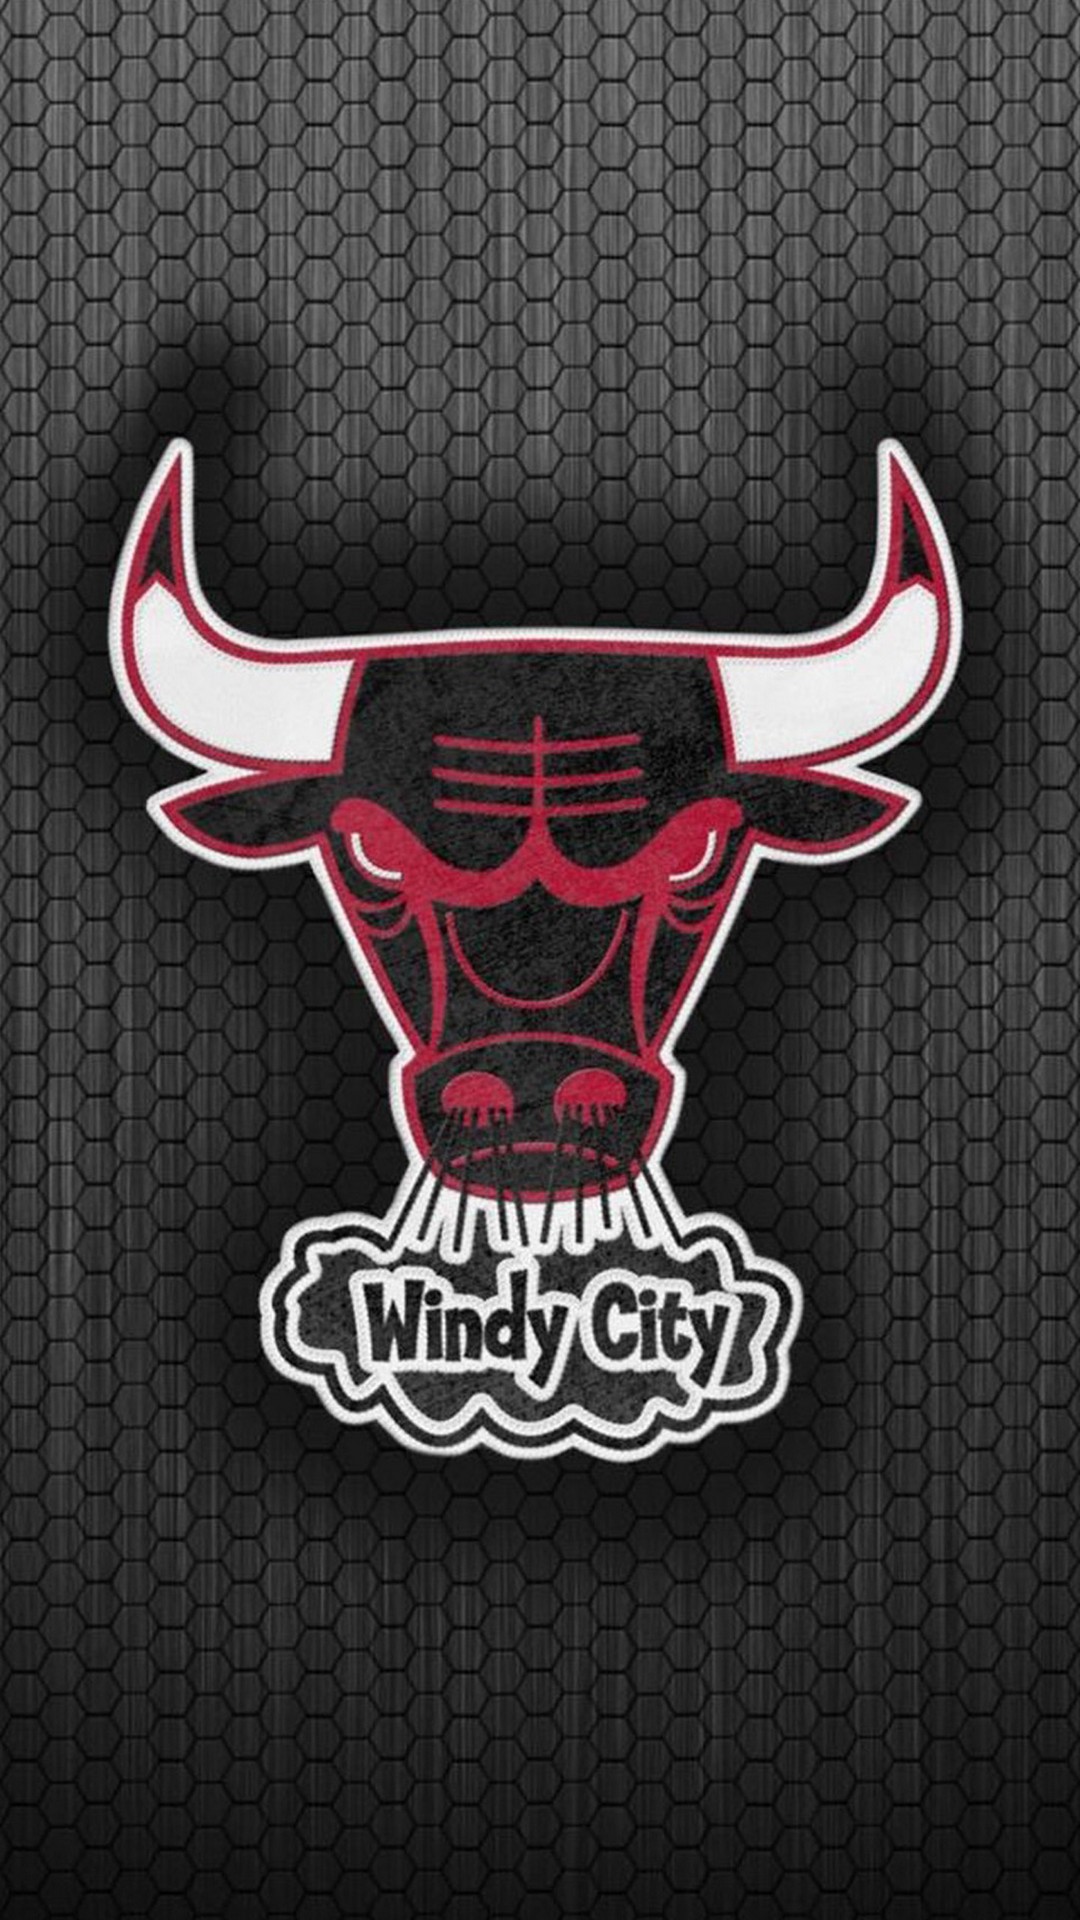 Chicago Bulls HD Wallpaper For iPhone with high-resolution 1080x1920 pixel. You can use this wallpaper for your Desktop Computer Backgrounds, Windows or Mac Screensavers, iPhone Lock screen, Tablet or Android and another Mobile Phone device